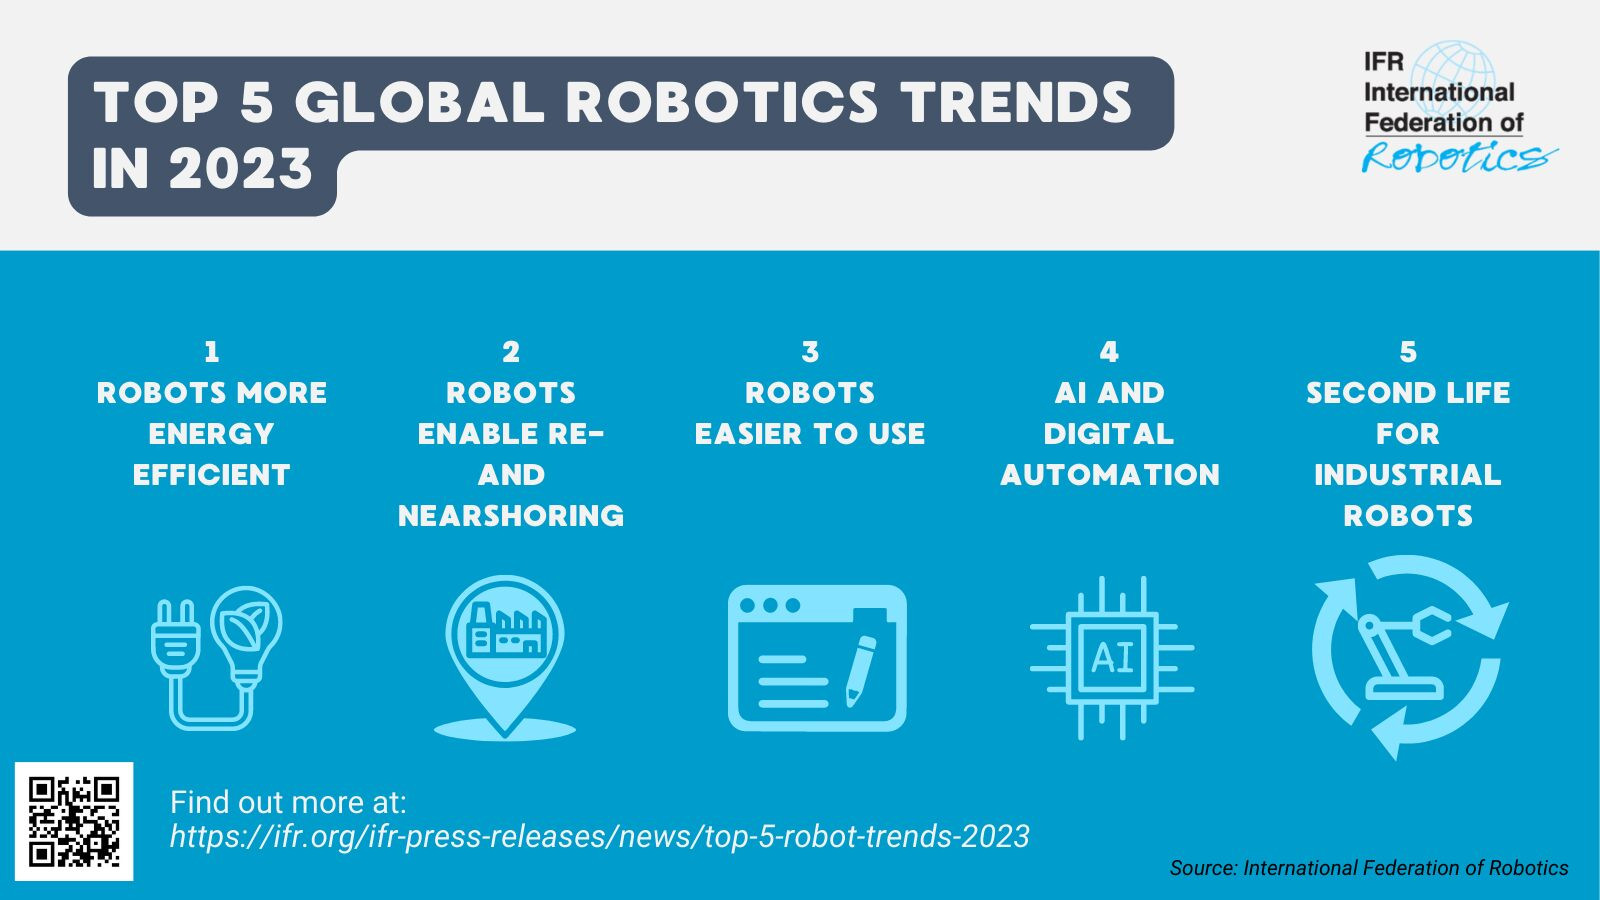 The IFR's five global robotics trends with small icons representing them.